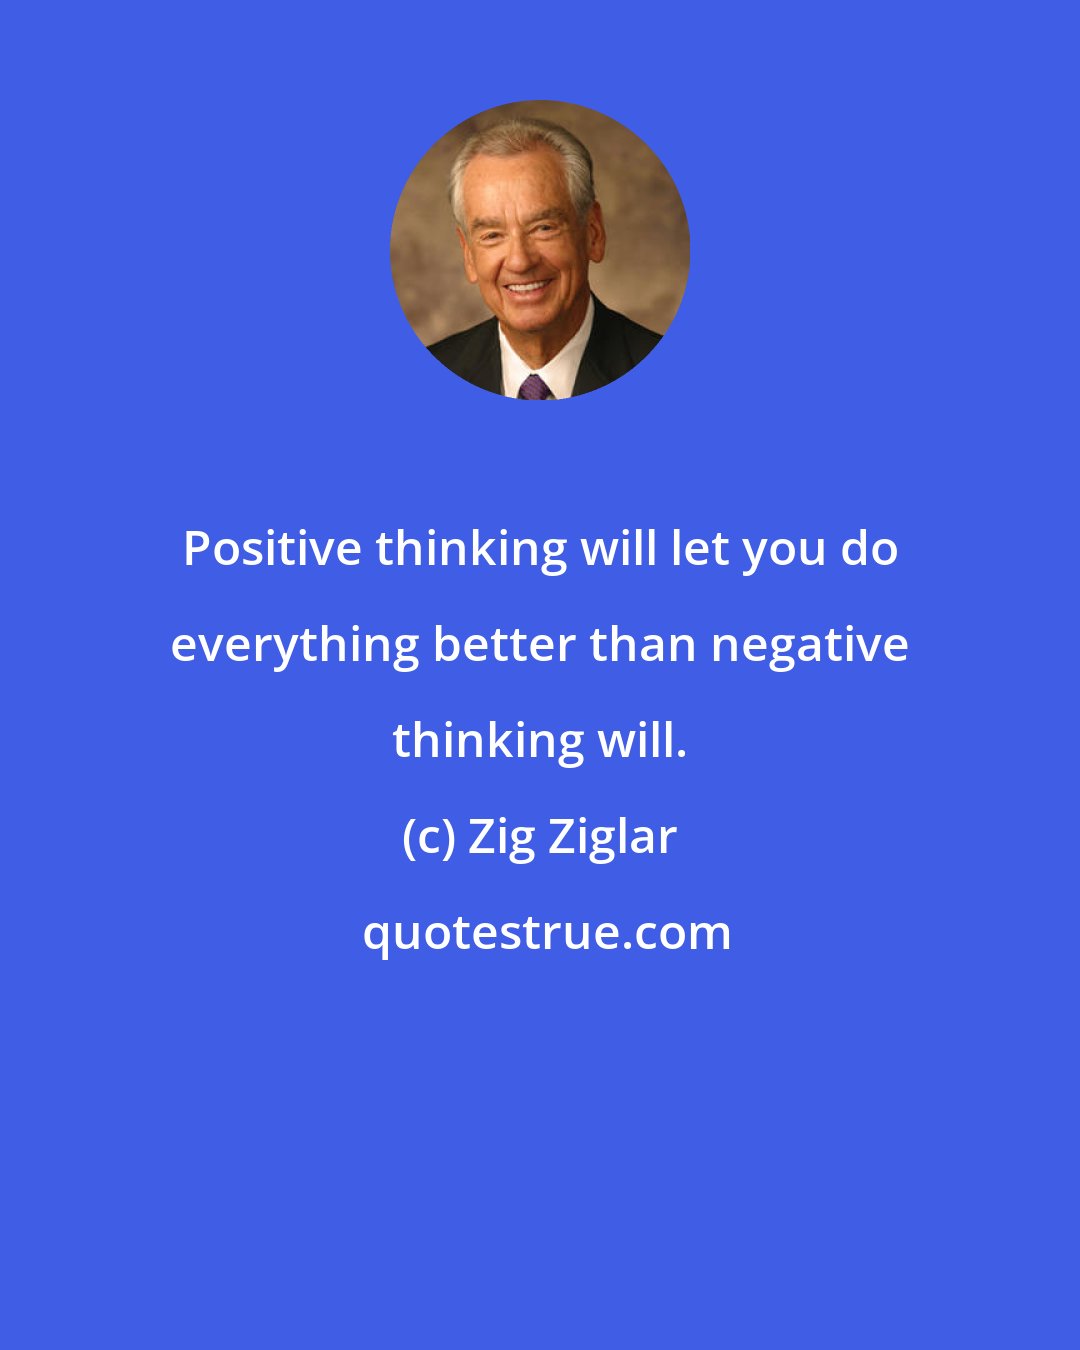 Zig Ziglar: Positive thinking will let you do everything better than negative thinking will.